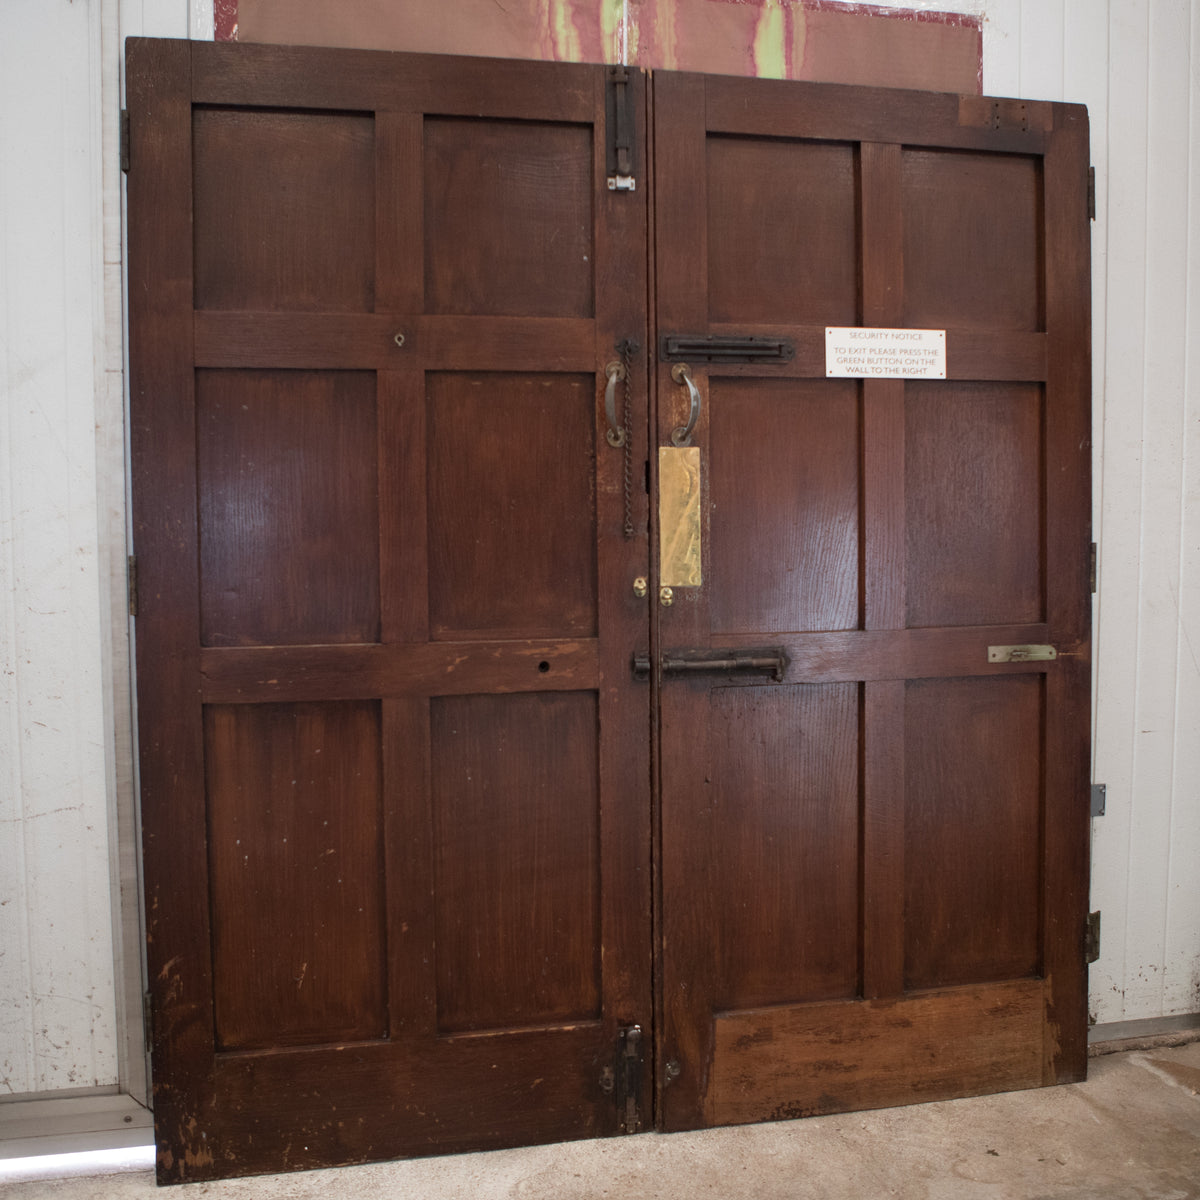 Carved Wooden Tudor Style Double Doors from King Edward VII Hospital | The Architectural Forum